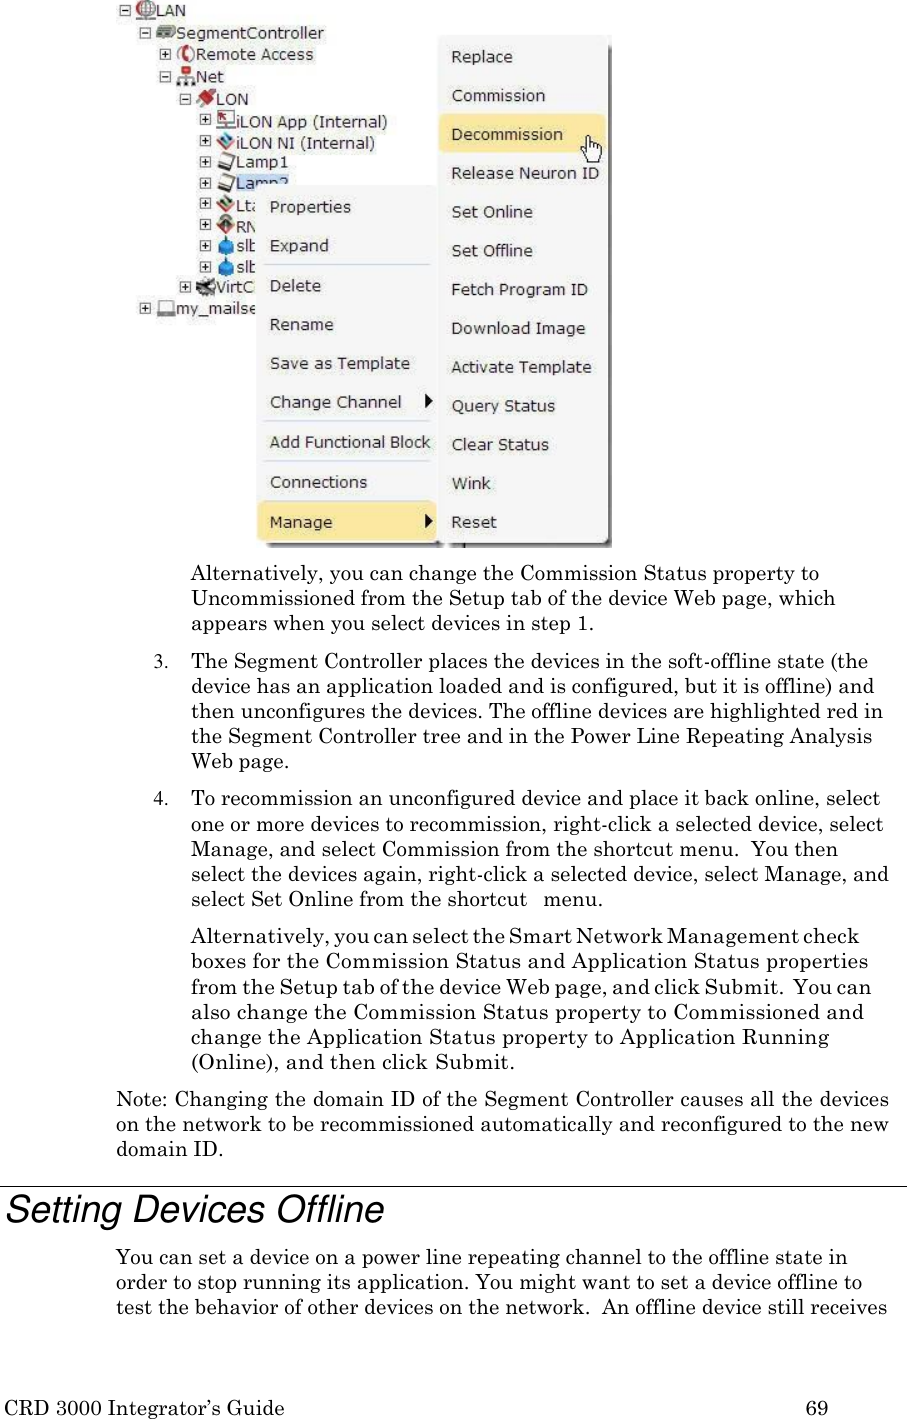 CRD 3000 Integrator’s Guide 69   Alternatively, you can change the Commission Status property to Uncommissioned from the Setup tab of the device Web page, which appears when you select devices in step 1. 3. The Segment Controller places the devices in the soft-offline state (the device has an application loaded and is configured, but it is offline) and then unconfigures the devices. The offline devices are highlighted red in the Segment Controller tree and in the Power Line Repeating Analysis Web page. 4. To recommission an unconfigured device and place it back online, select one or more devices to recommission, right-click a selected device, select Manage, and select Commission from the shortcut menu.  You then  select the devices again, right-click a selected device, select Manage, and select Set Online from the shortcut   menu. Alternatively, you can select the Smart Network Management check boxes for the Commission Status and Application Status properties from the Setup tab of the device Web page, and click Submit.  You can also change the Commission Status property to Commissioned and change the Application Status property to Application Running (Online), and then click Submit. Note: Changing the domain ID of the Segment Controller causes all the devices on the network to be recommissioned automatically and reconfigured to the new domain ID.  Setting Devices Offline You can set a device on a power line repeating channel to the offline state in order to stop running its application. You might want to set a device offline to test the behavior of other devices on the network.  An offline device still receives 